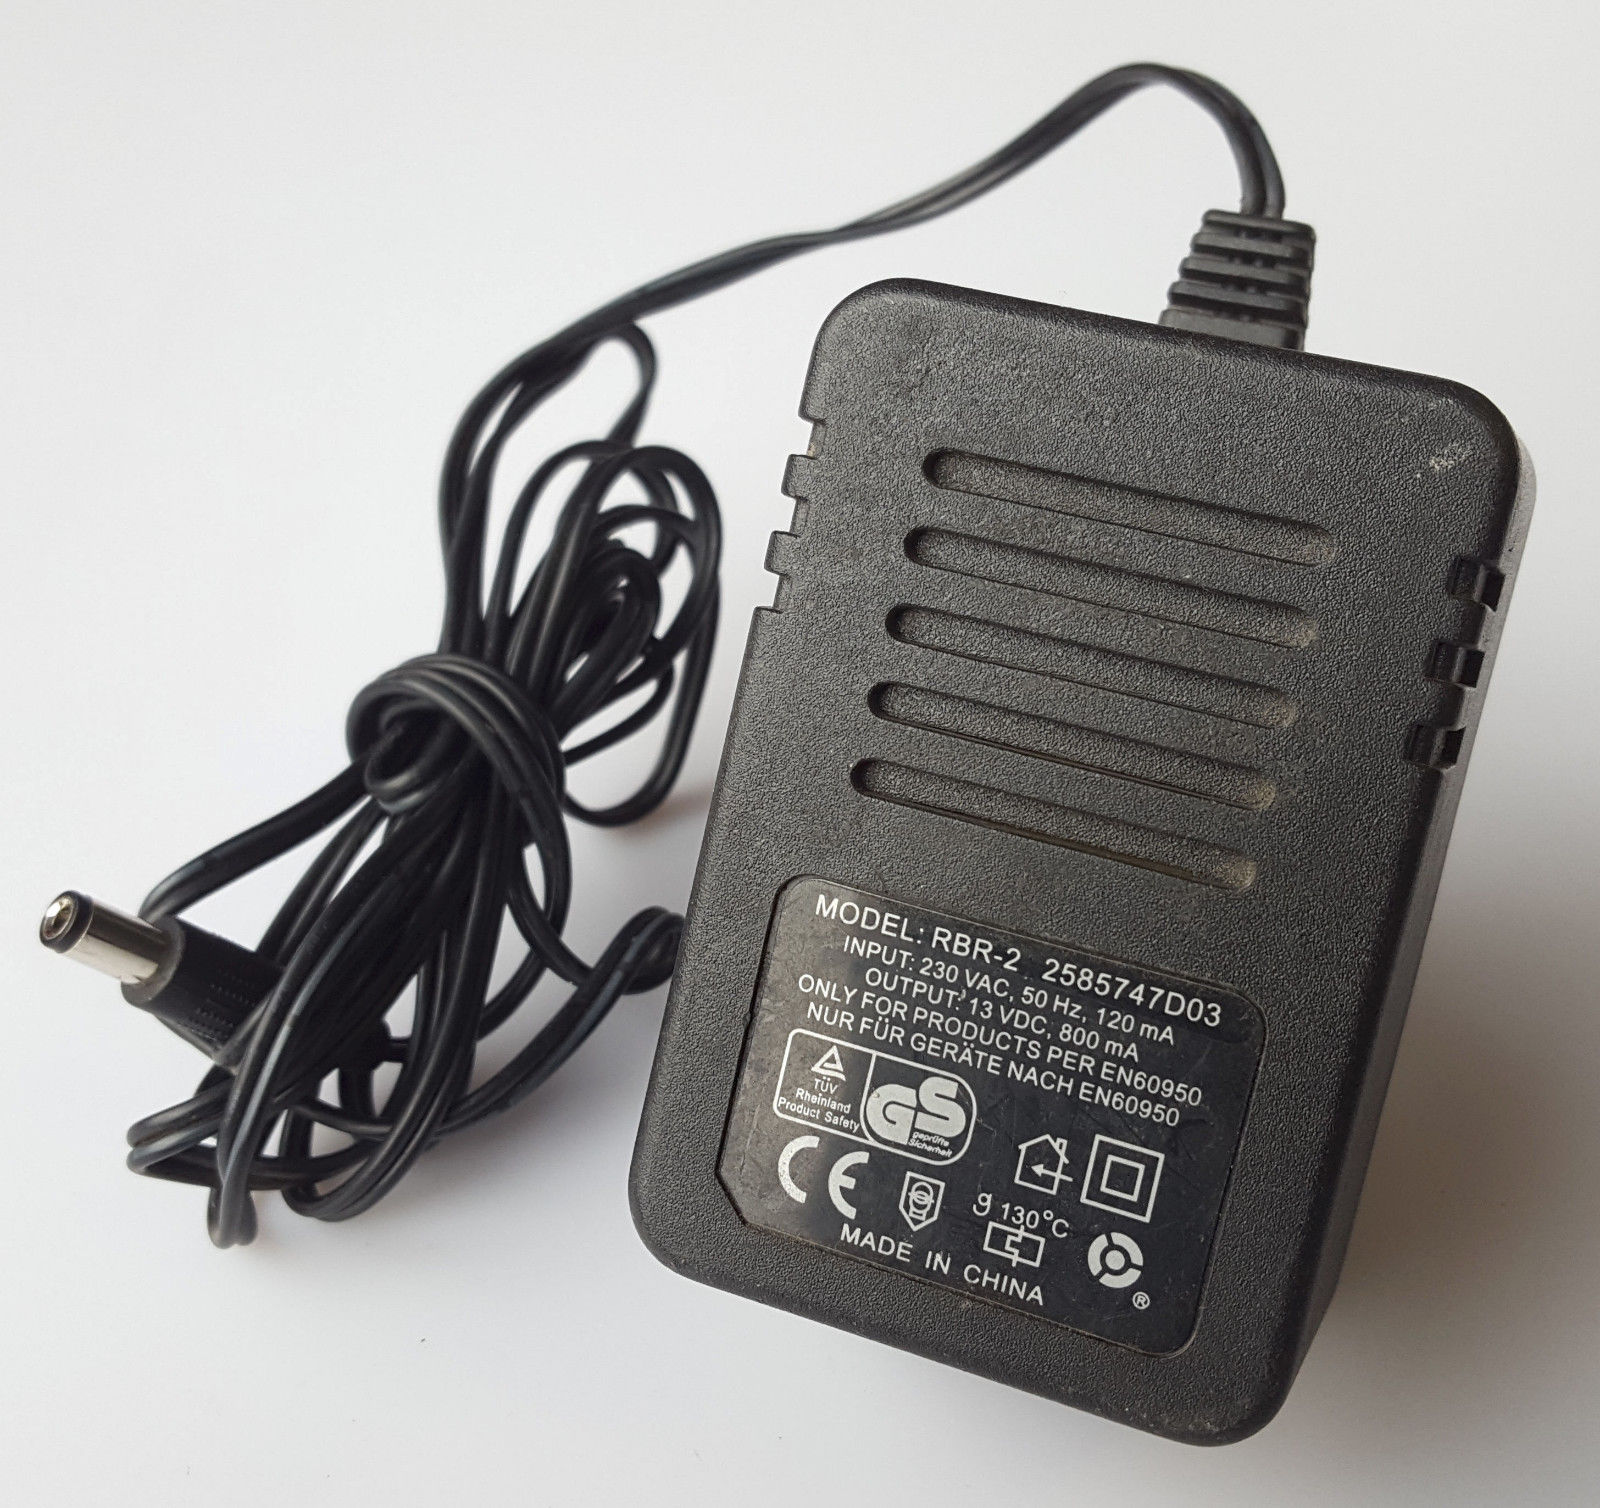 *Brand NEW*RBR-2 2585747D03 13V 0.8A AC/DC POWER SUPPLY ADAPTER